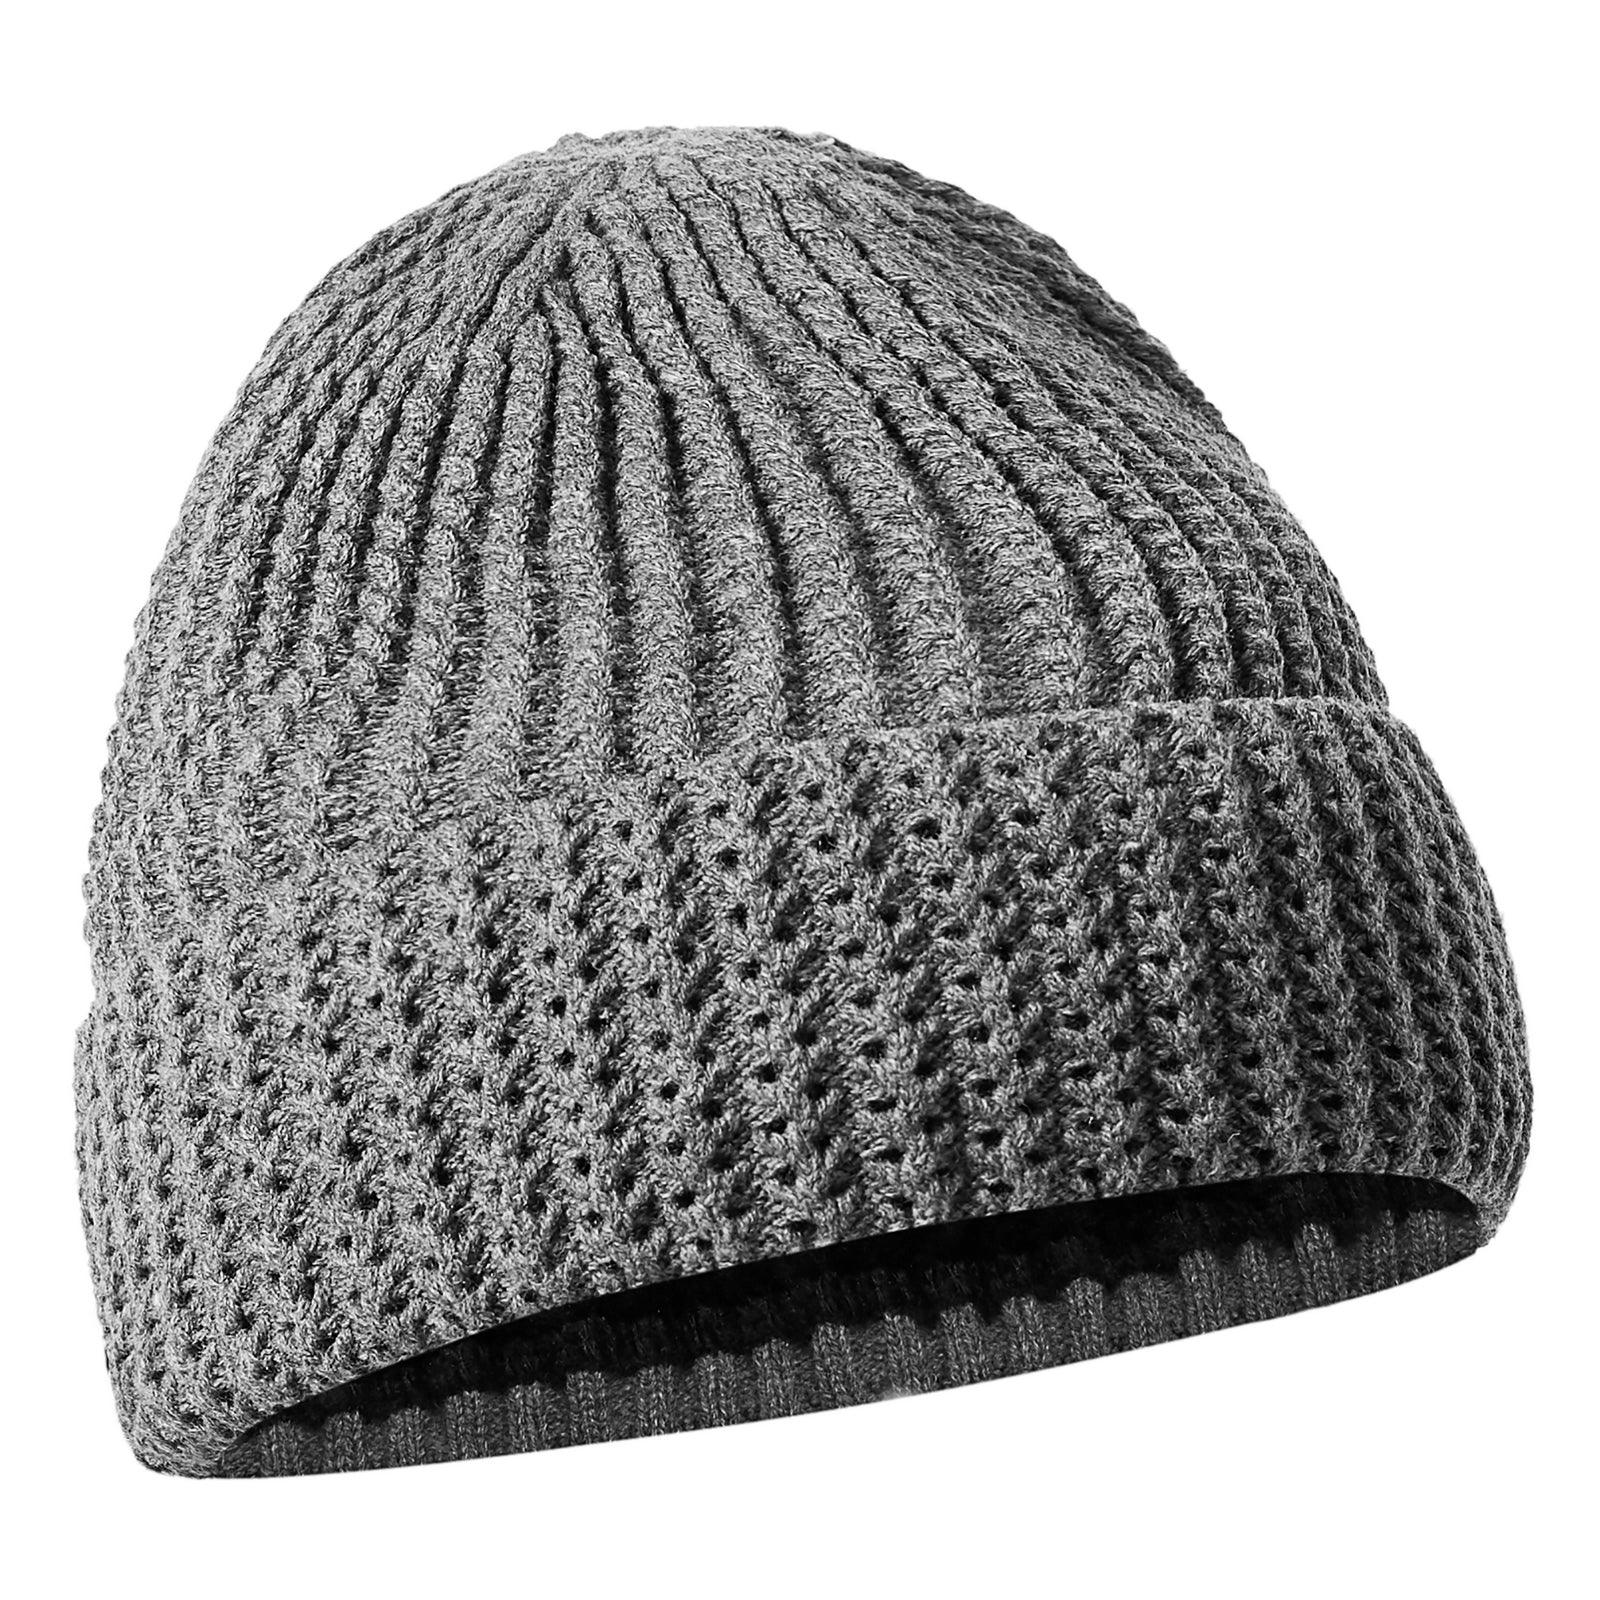 W6464 - Mens Boys Ladies Unisex Wooly Knitted Beanie Ski Hat Warm Winter Turn Up Chunky-TruClothing